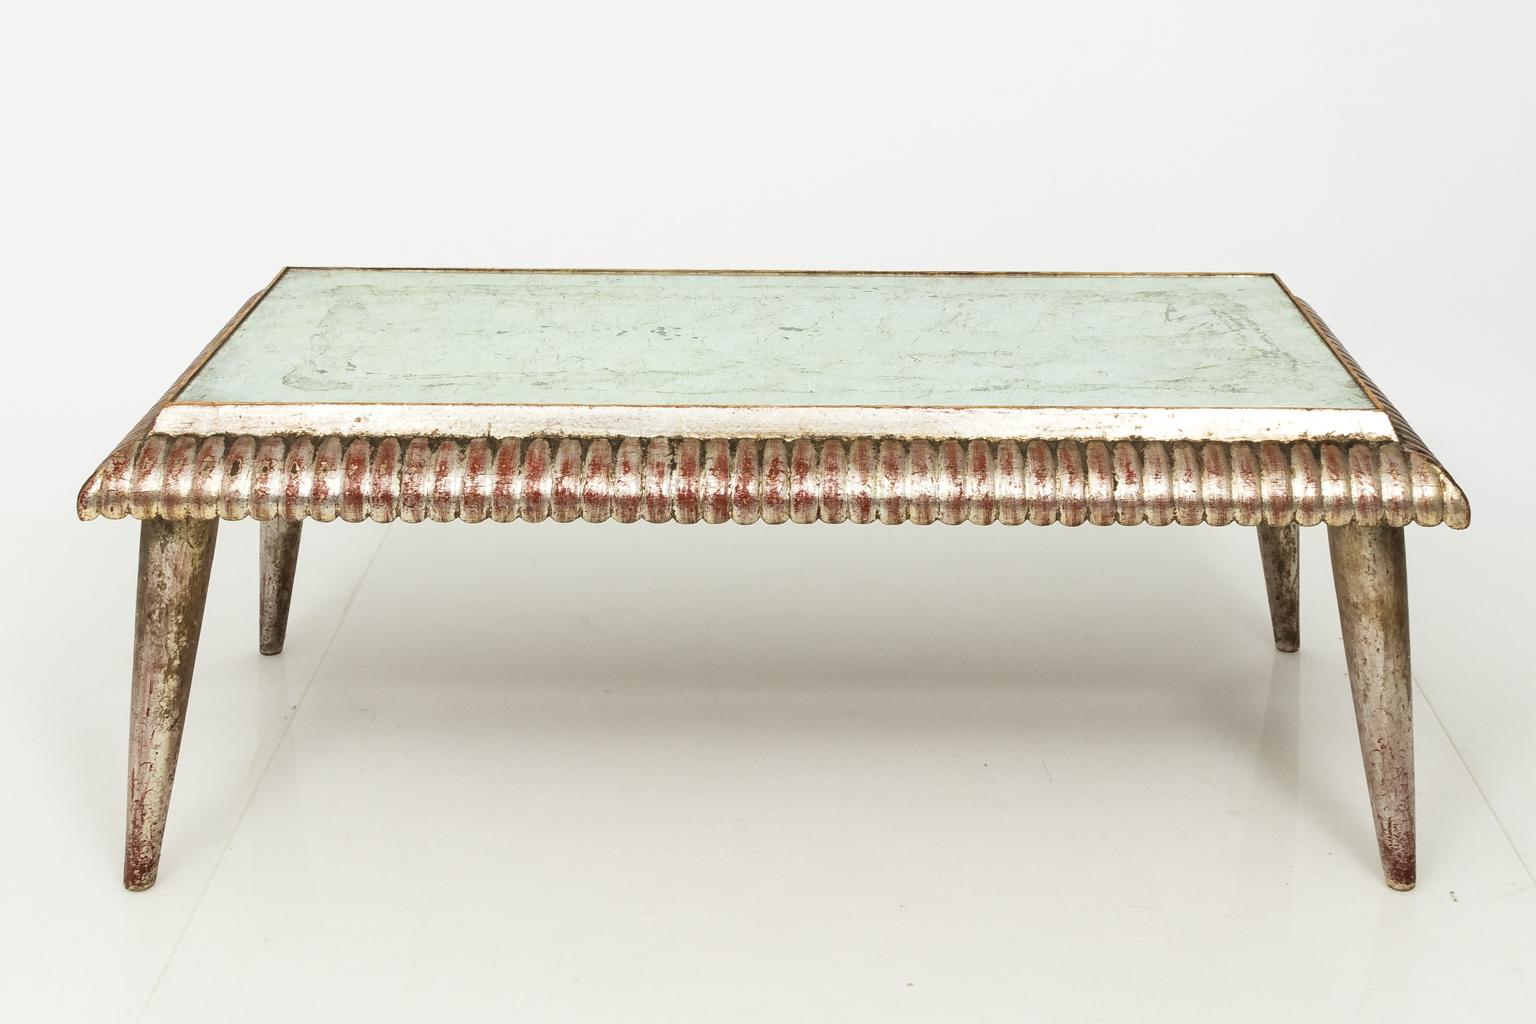 Italian silver leaf low table with mirrored top, carved gadroon trim, and plain tapered legs, circa 20th century.
      